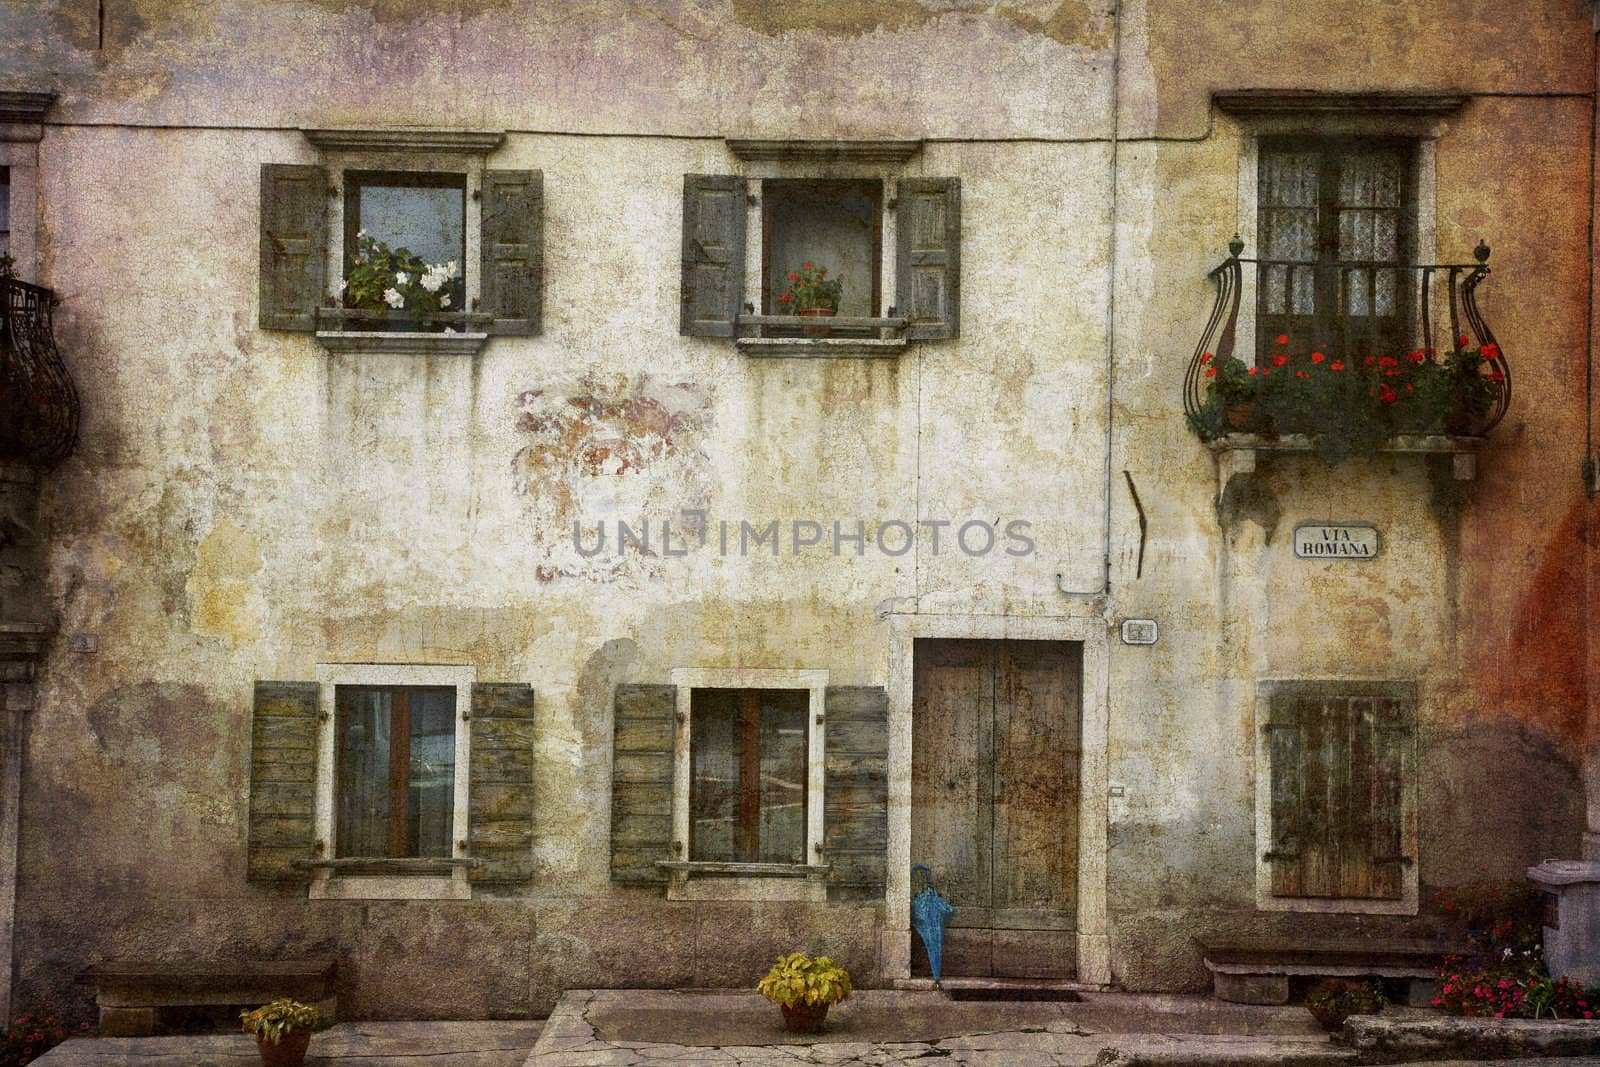 Beautiful Italian village home in decay. More of my images worked together to reflect time and age.